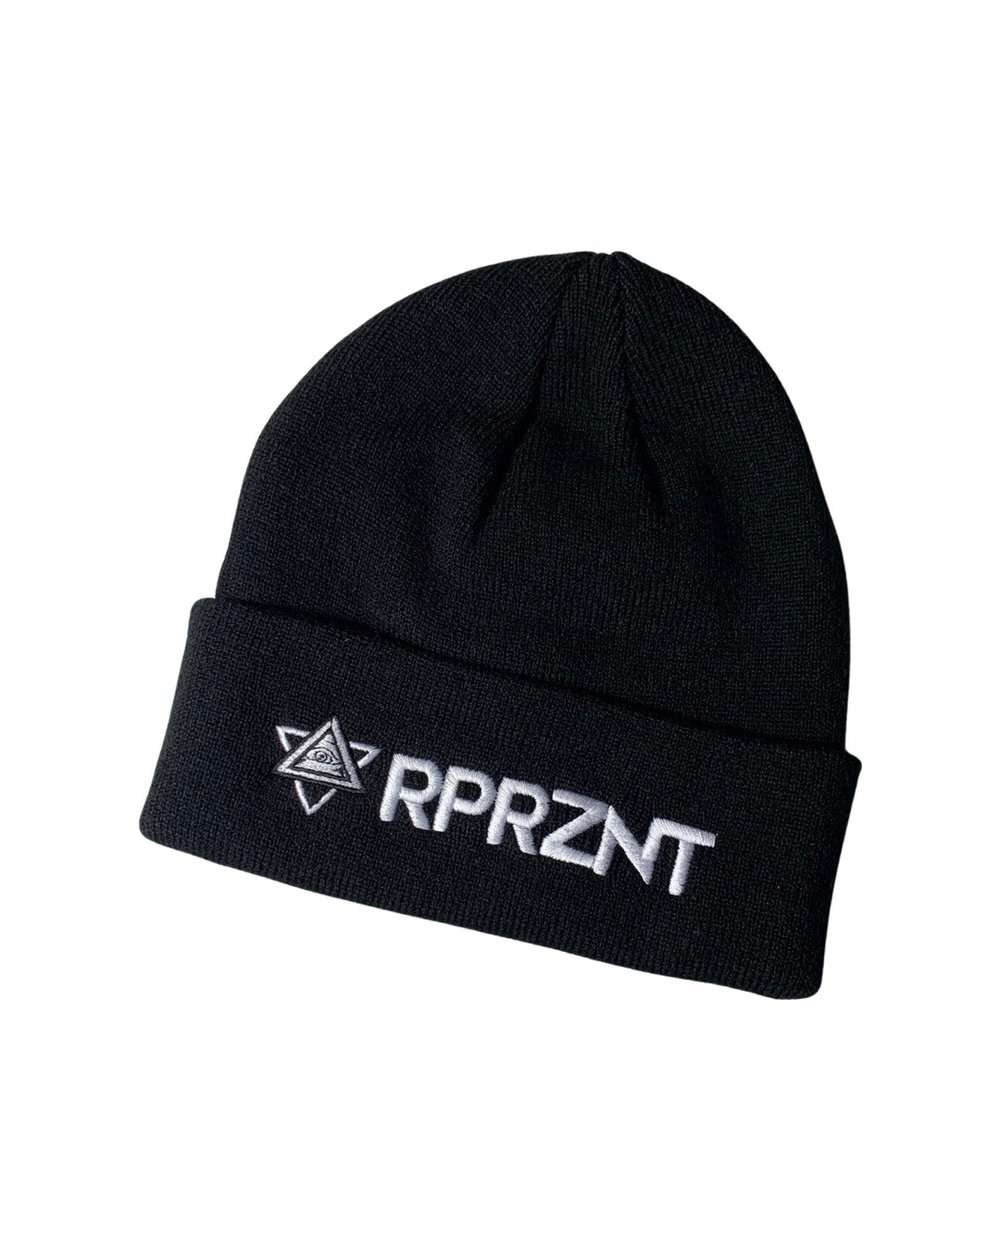 Image of Limited Beanies 2020